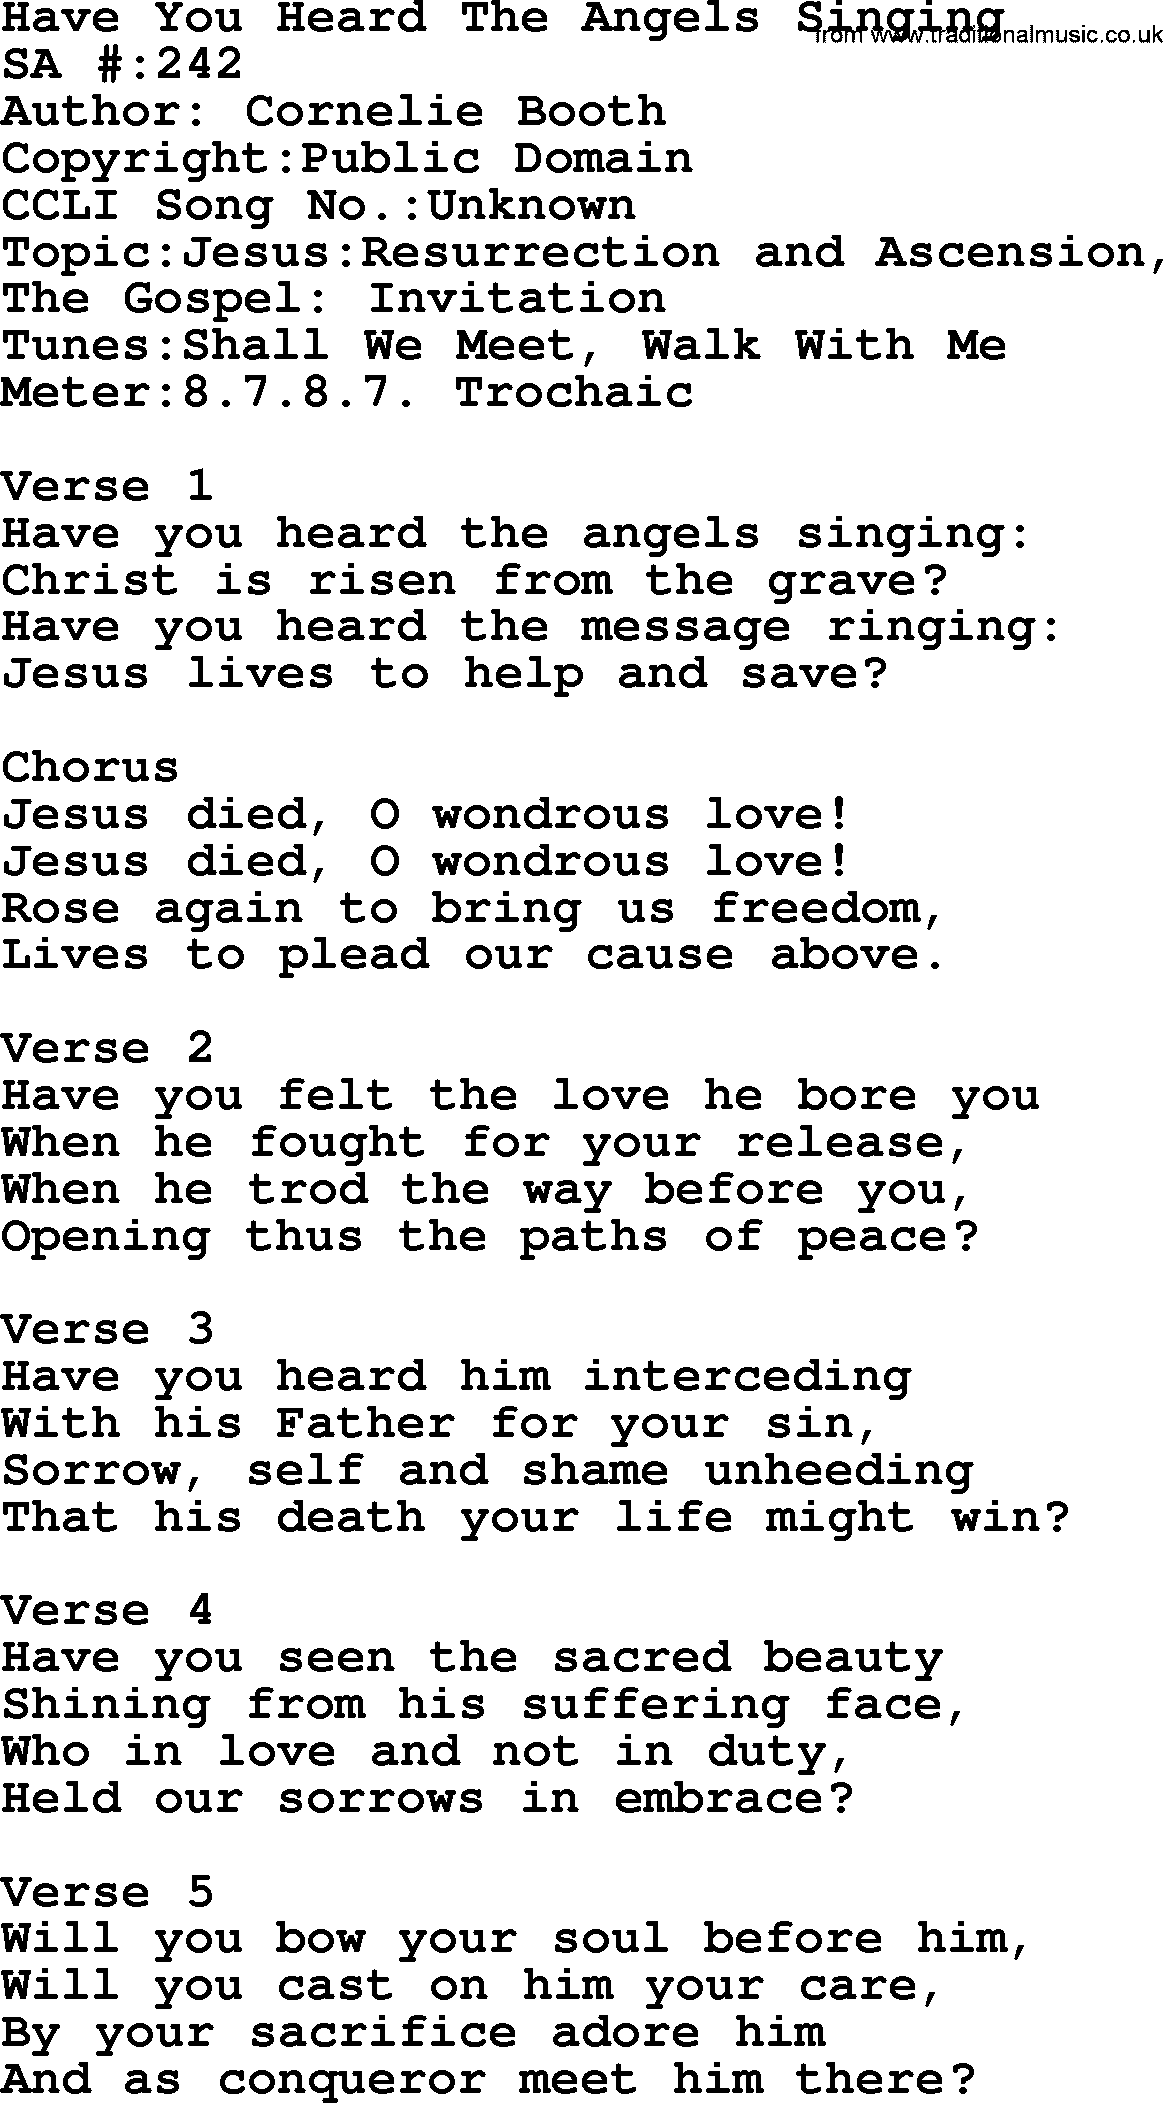 Salvation Army Hymnal, title: Have You Heard The Angels Singing, with lyrics and PDF,